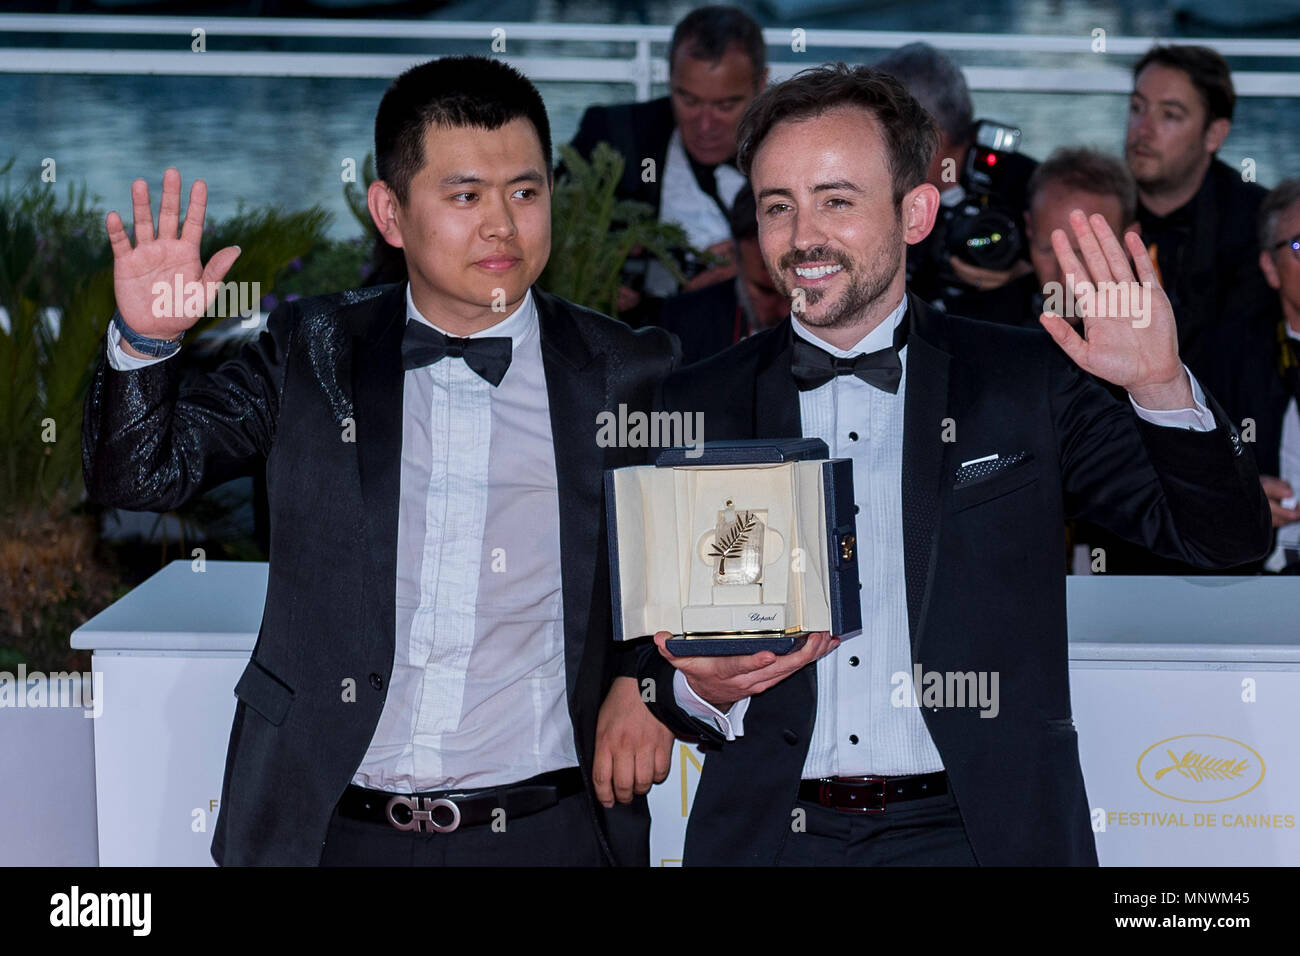 Cannes, France. 19th May 2018. Australian director Charles Williams, short film Palm d'Or award winner for his film 'All These Creatures' poses with Wei Shujun special mention award winner for his film 'Border' at the photocall the Palme D'Or Winner during the 71st annual Cannes Film Festival at Palais des Festivals on May 19, 2018 in Cannes, France Credit: BTWImages/Alamy Live News Stock Photo